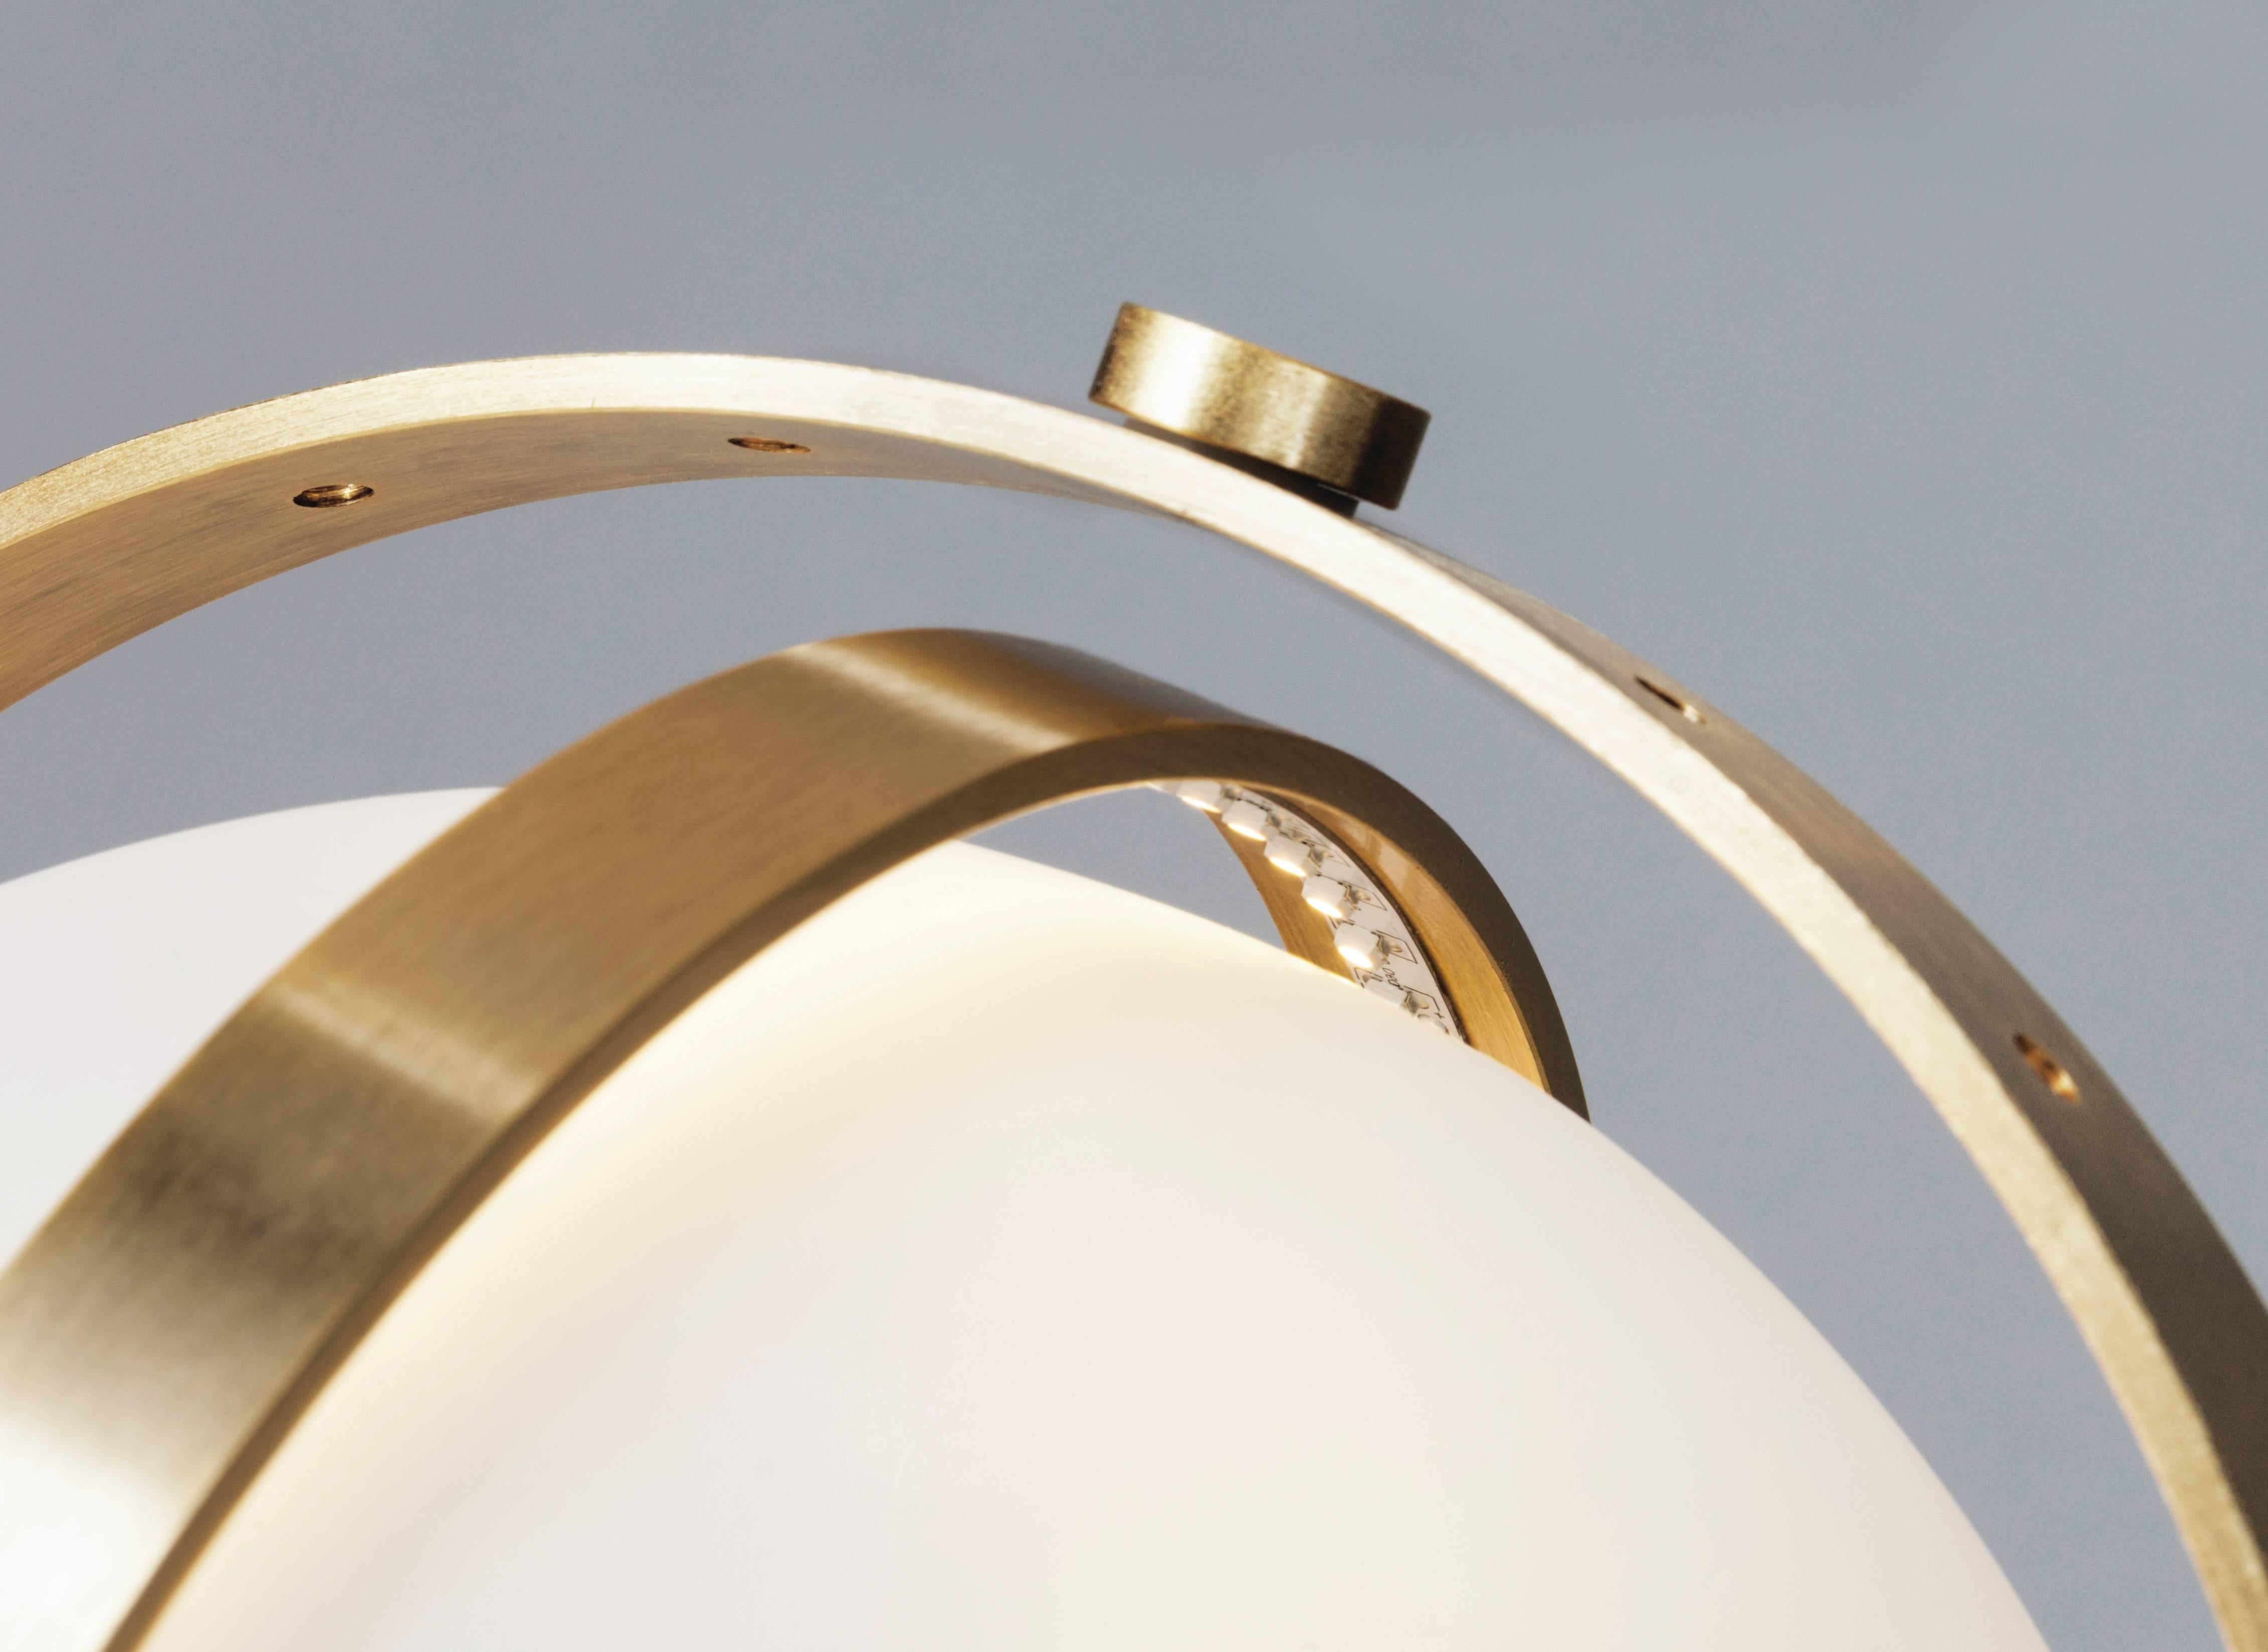 Vega is the latest family in the evolution of the Flexus series by Baroncelli. 

Flexus is a lighting system that comprises a palette of abstracted lines, curves and circles. Echoing the language of Modernist modular thinking, it captures the